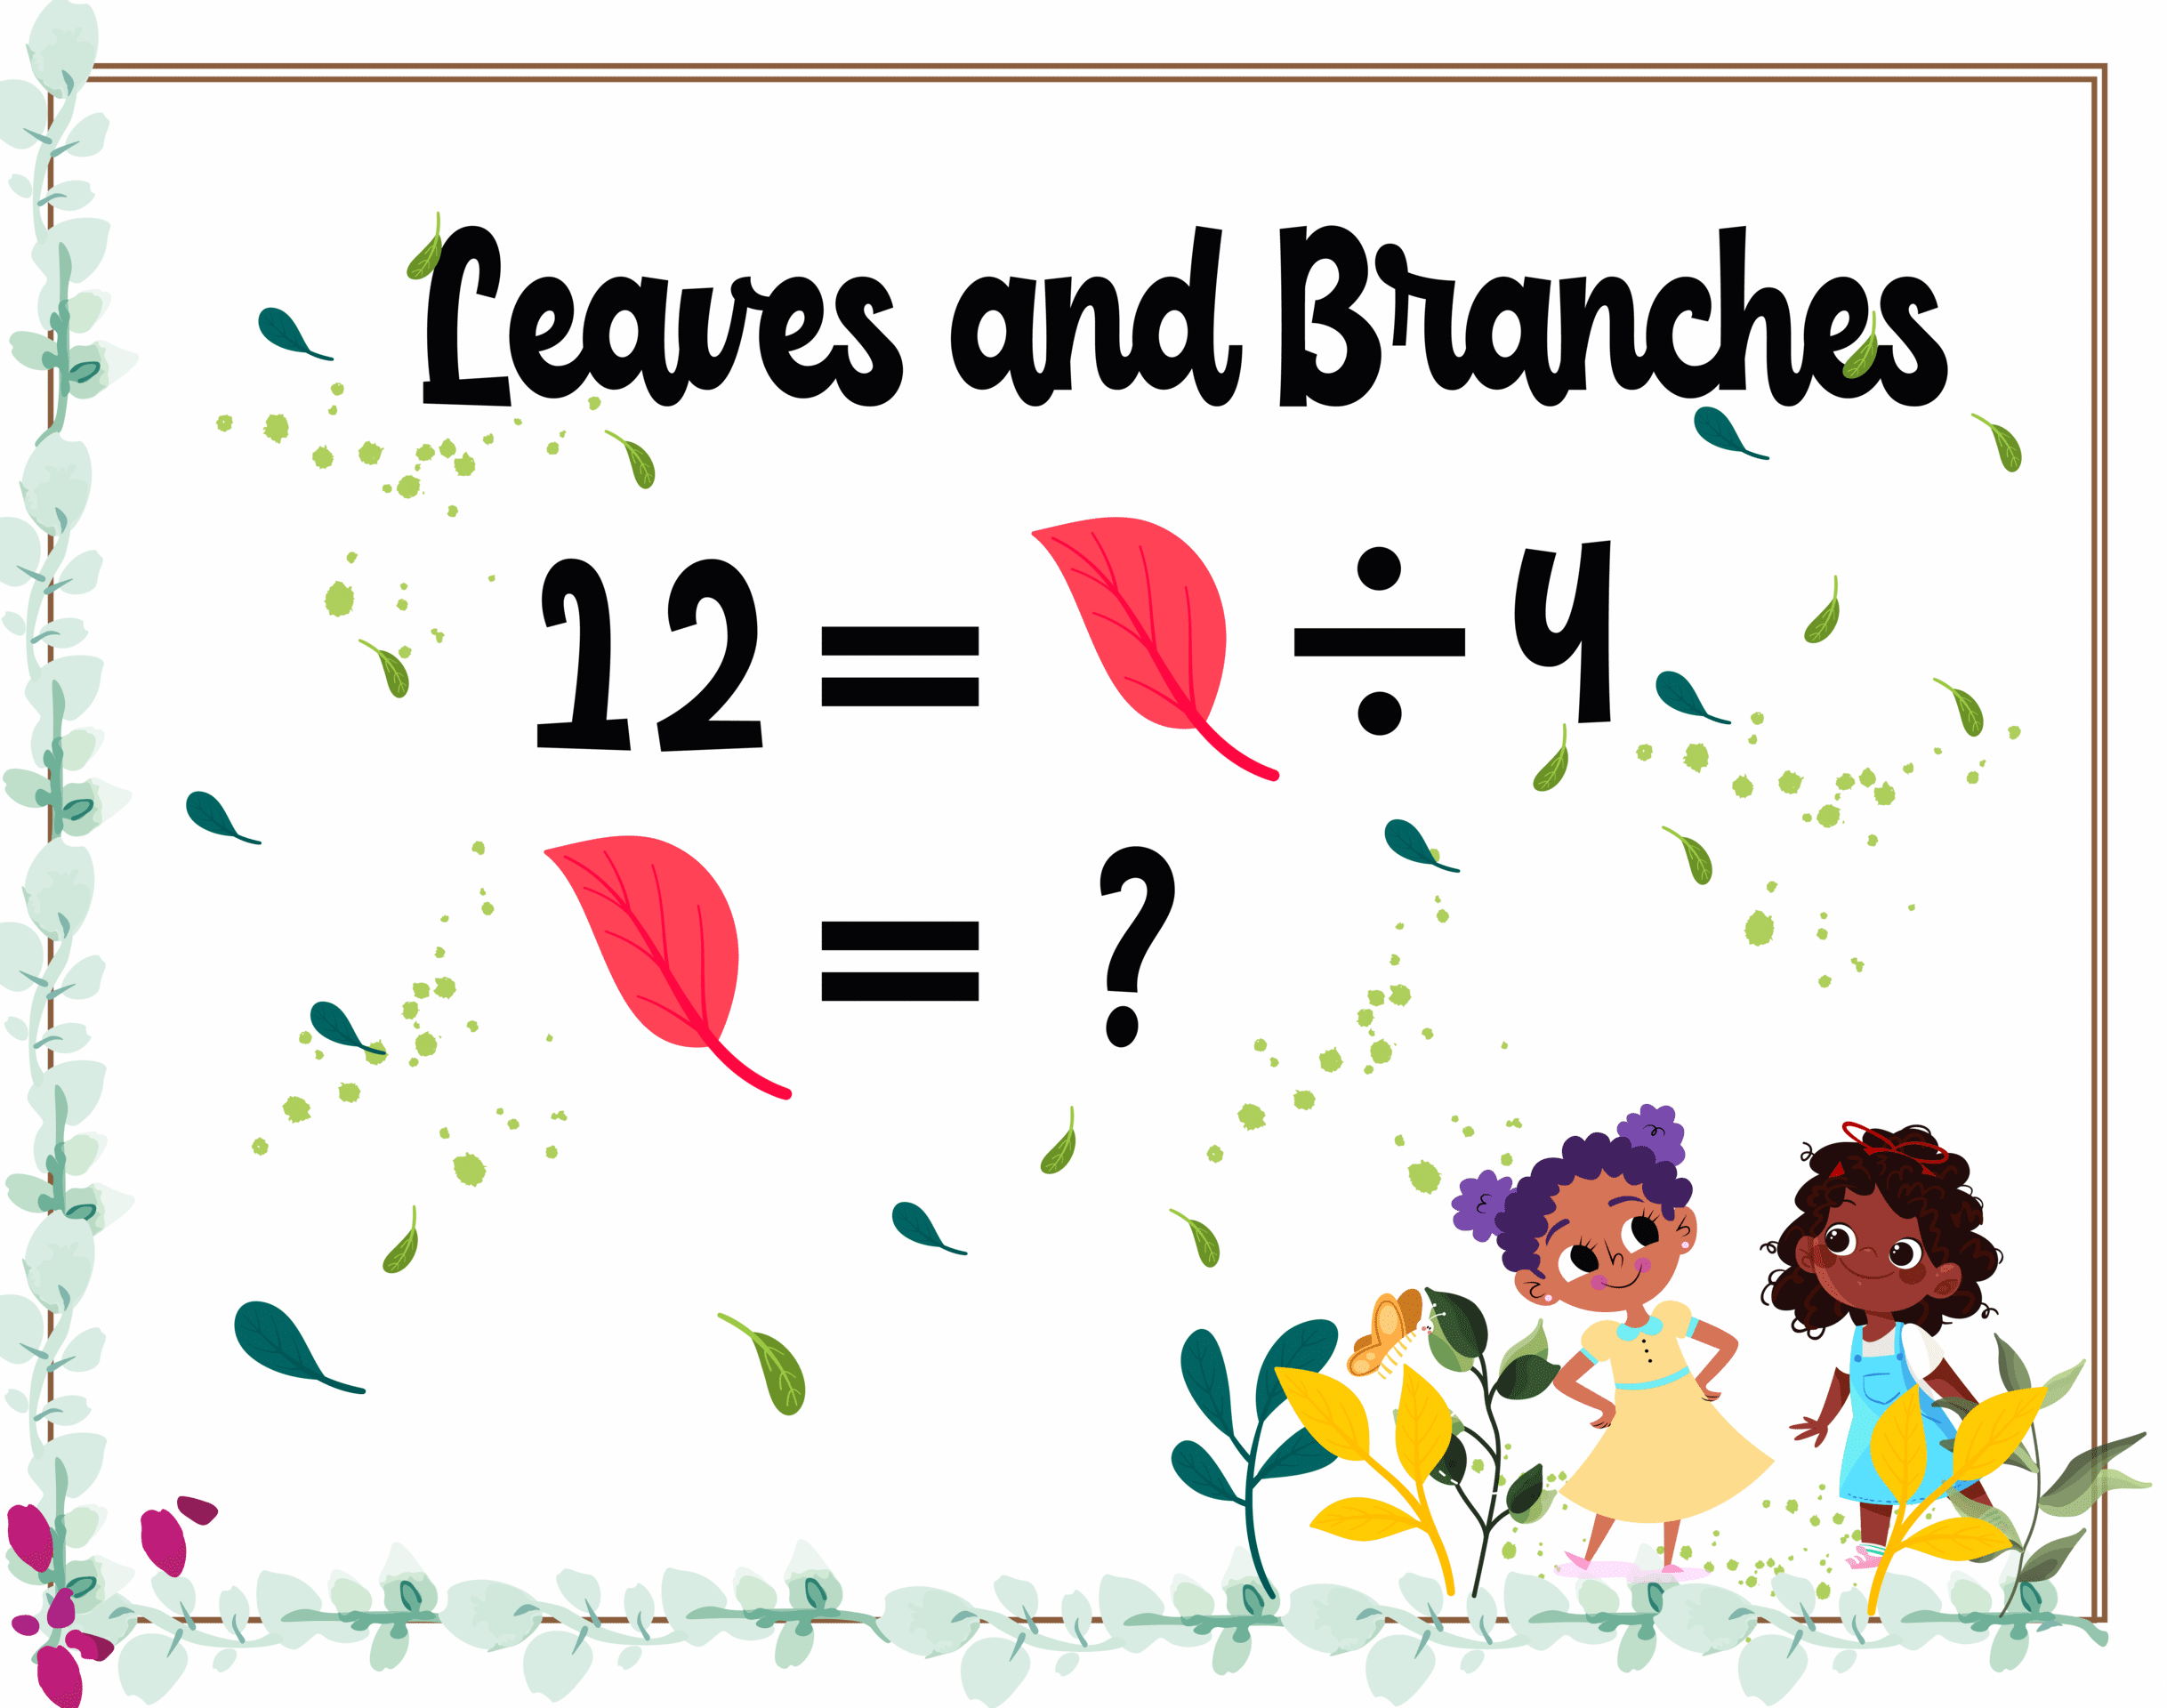 Leaves and Branches game to find missing dividend